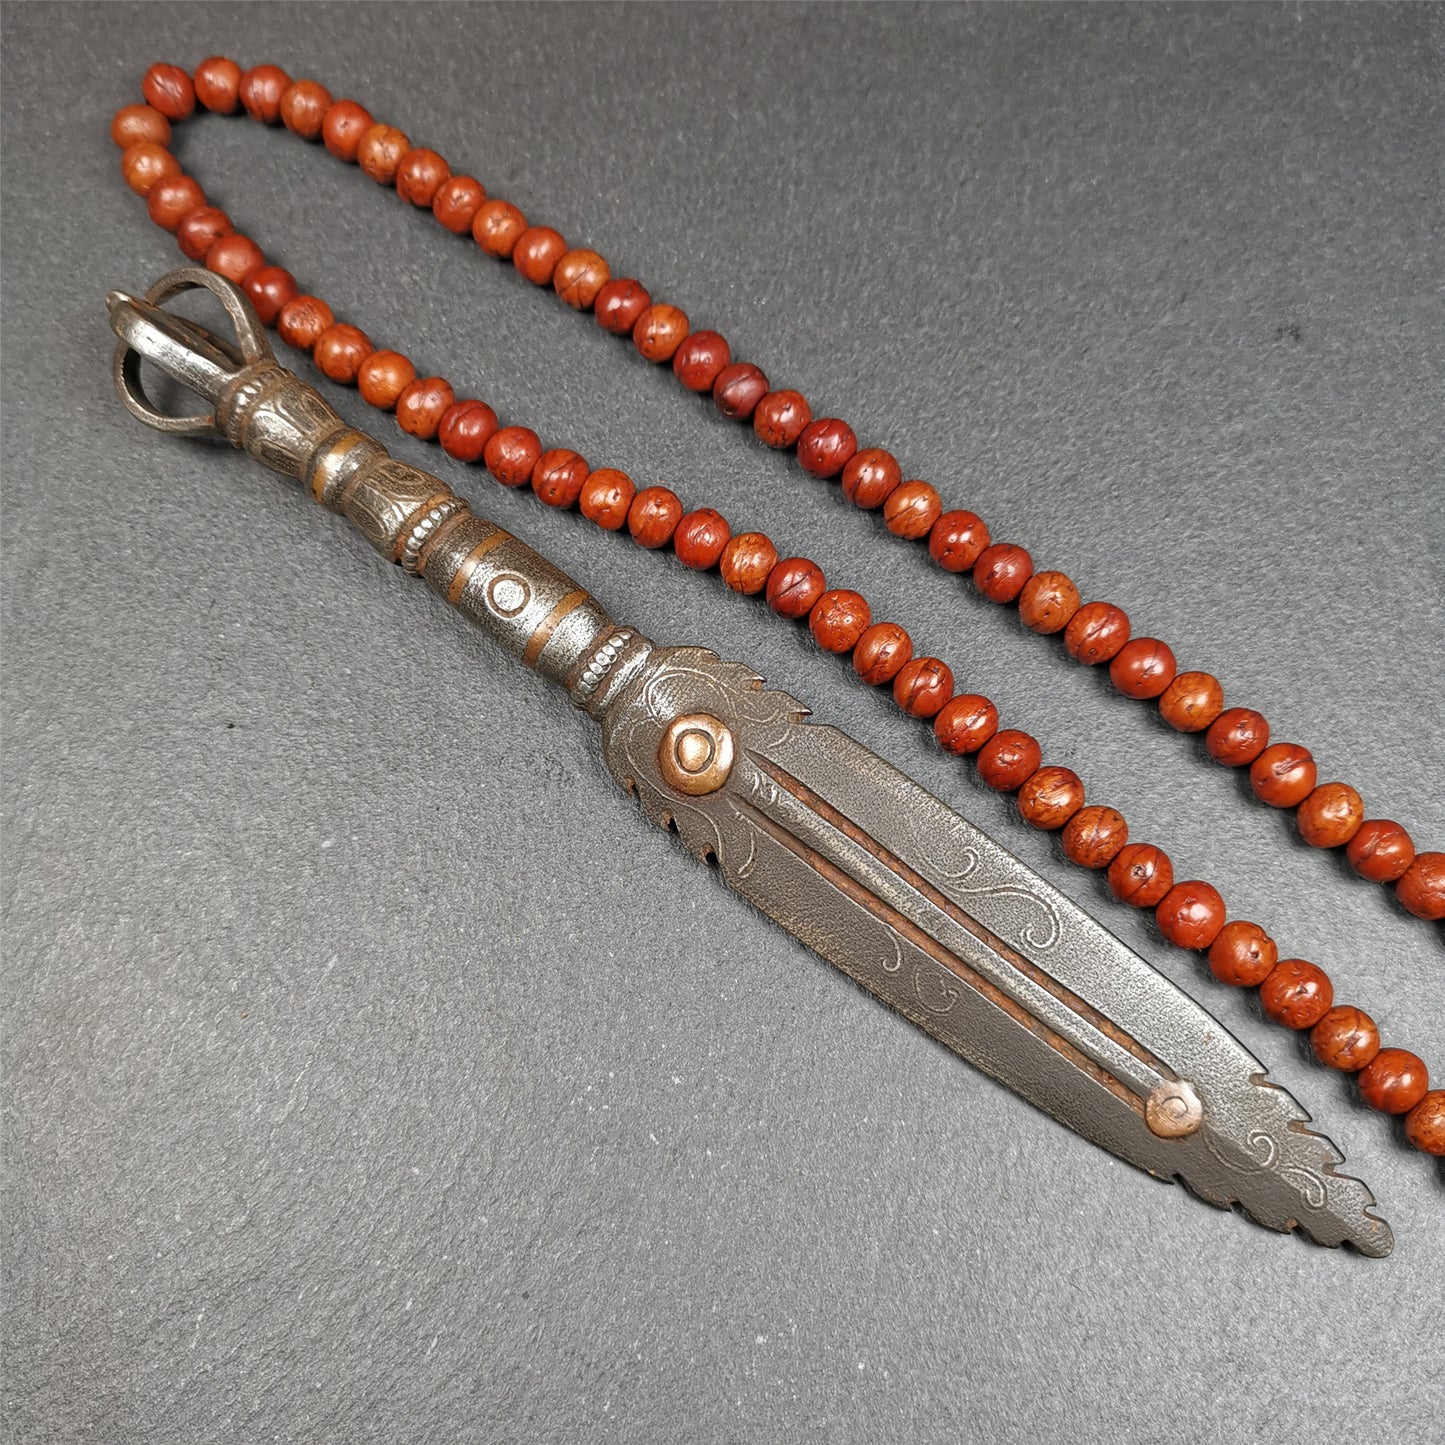 This vajra sword was handmade by Tibetan craftsmen from Tibet in 1990s. It's Fire Vajra Sword of Wisdom Buddha Manjushri,made of cold iron,inlaid red copper stripe,carved with flame pattern, and the half vajra at the tail,7.5 inches length.